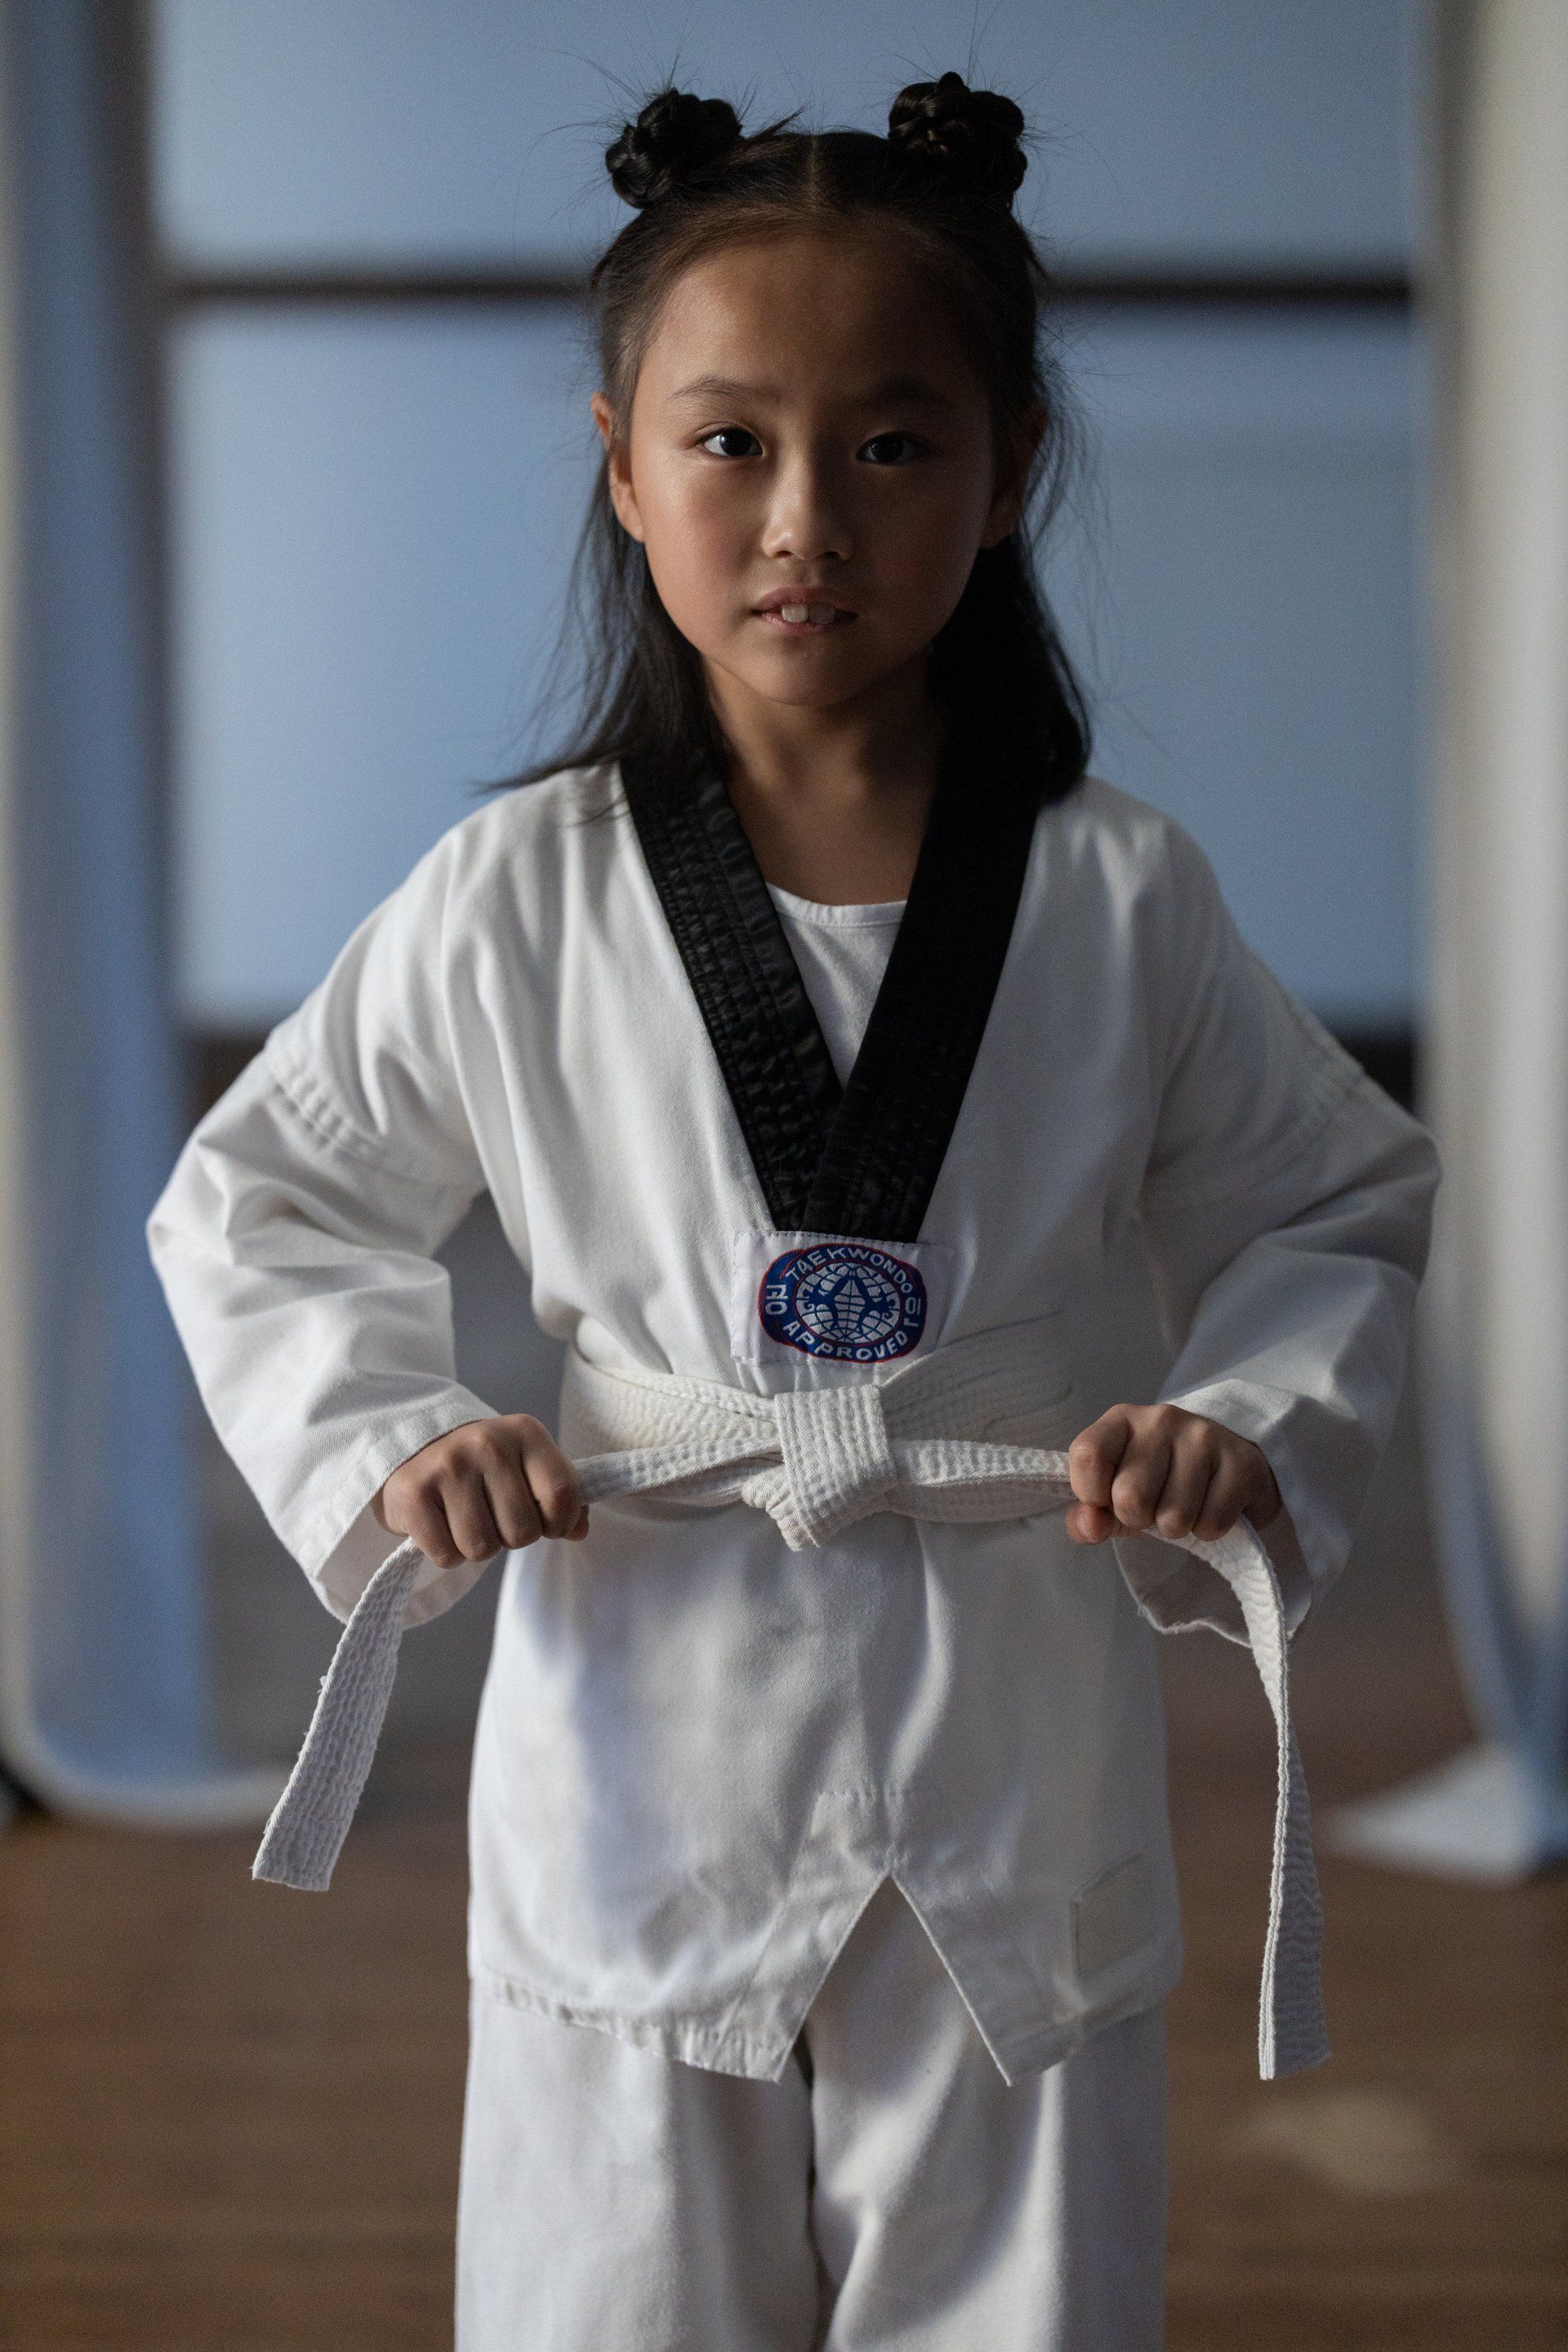 A young girl is wearing a karate uniform and holding a white belt.